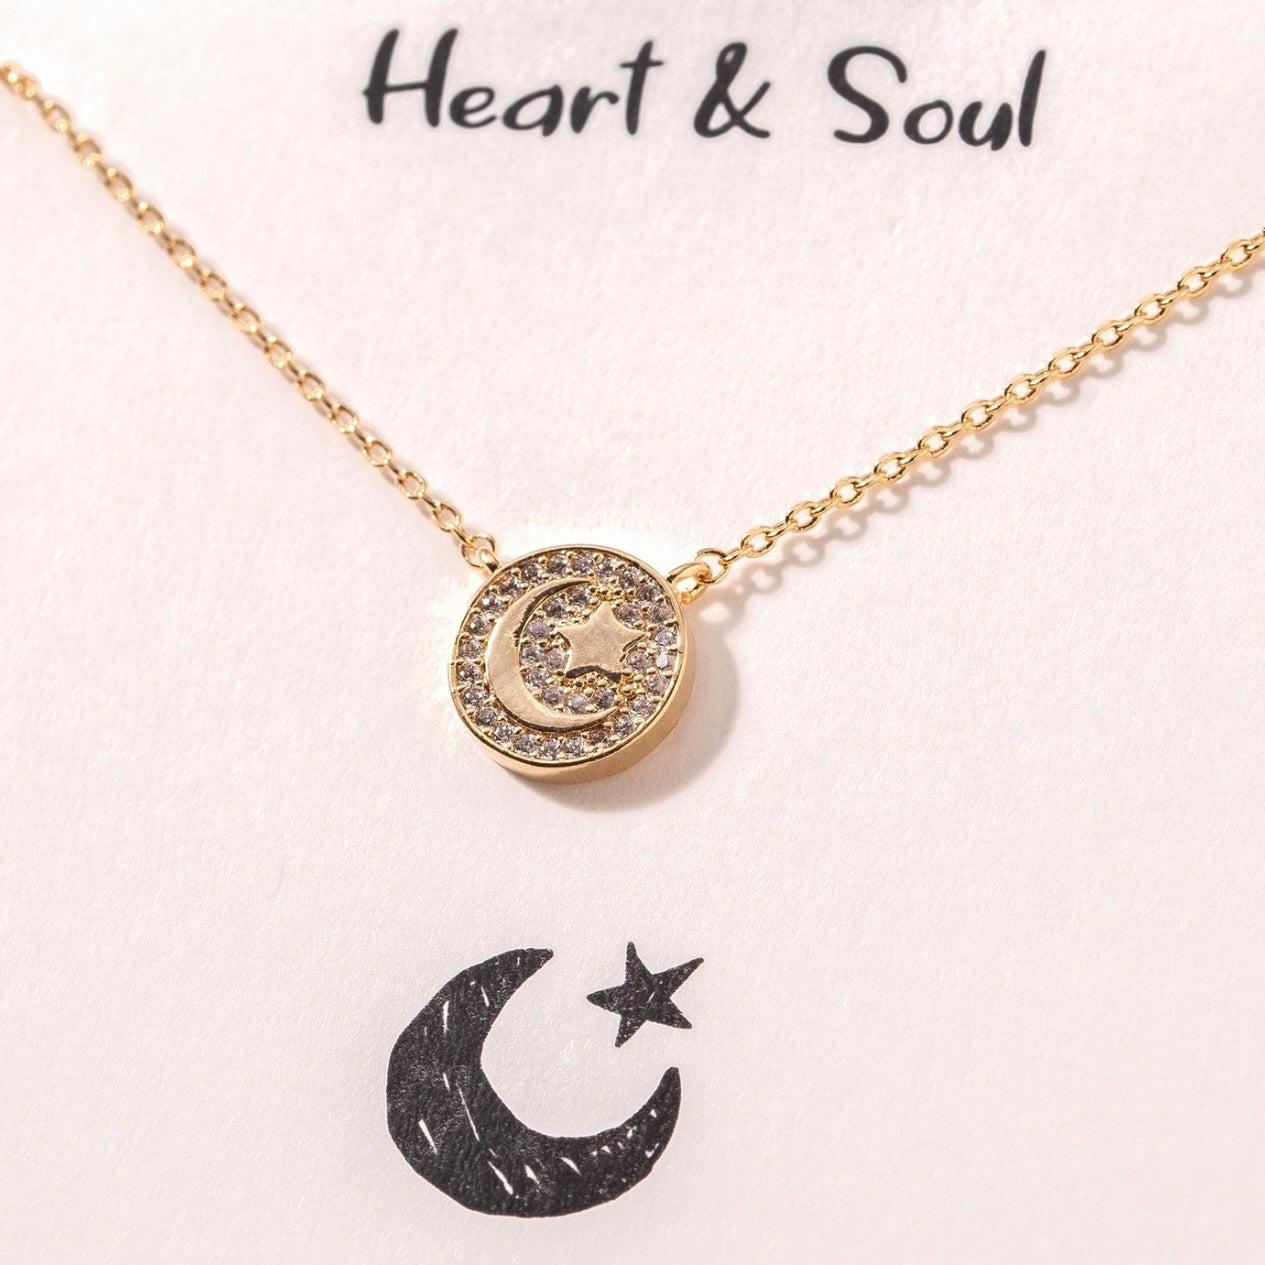 Gold Heart & Soul Moon Charm Necklace